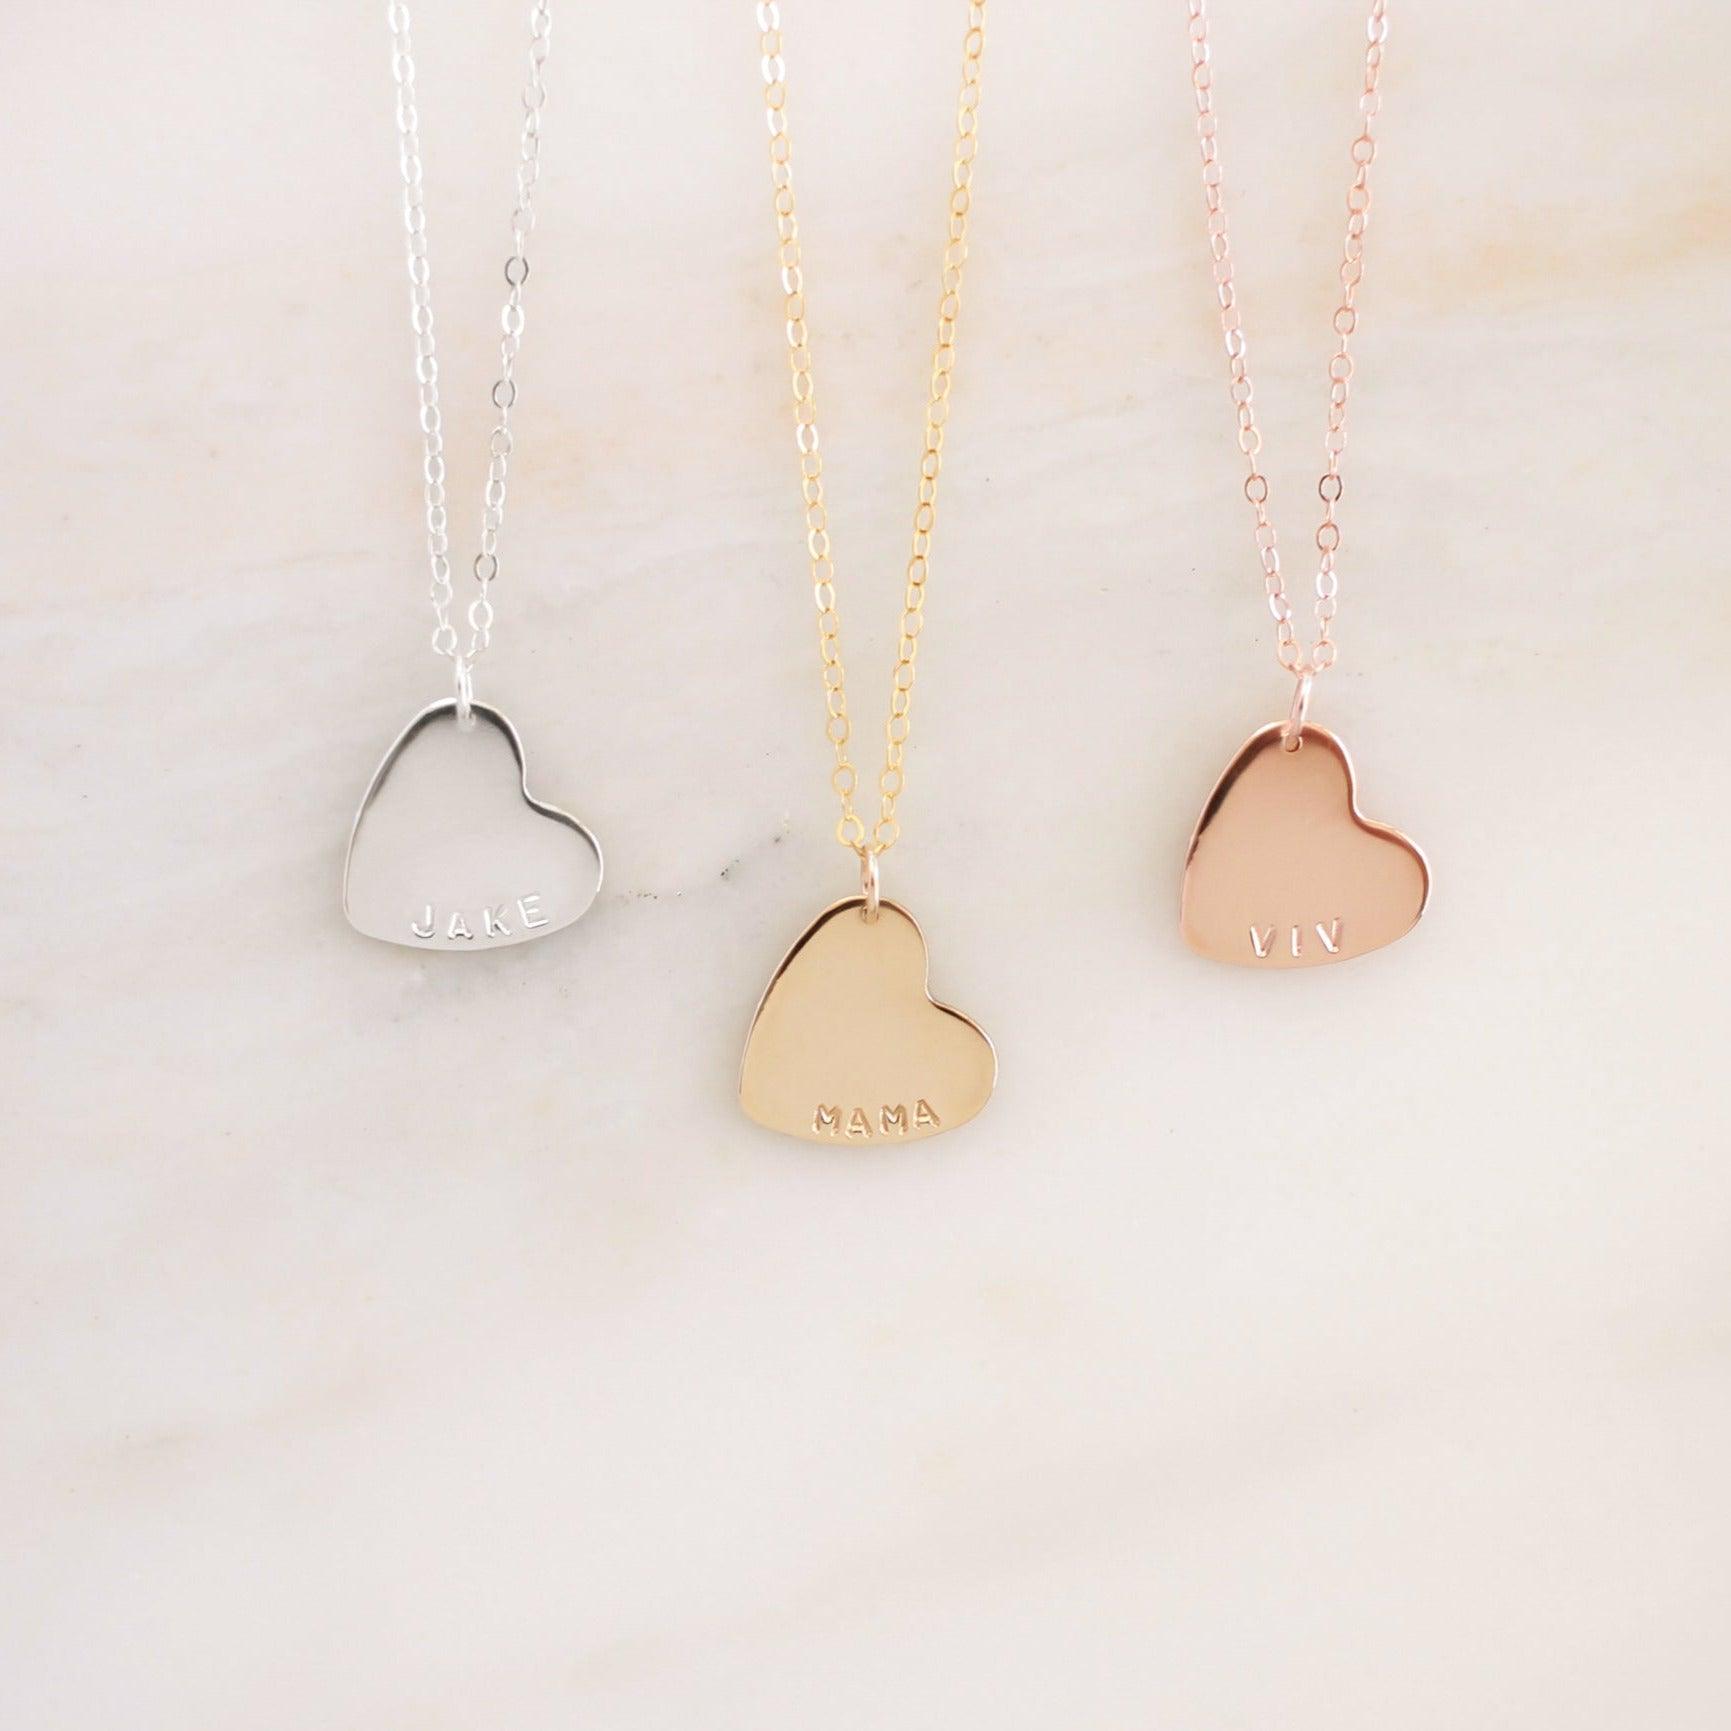 Maeve Heart Necklace - Nolia Jewelry - Meaningful + Sustainably Handcrafted Jewelry